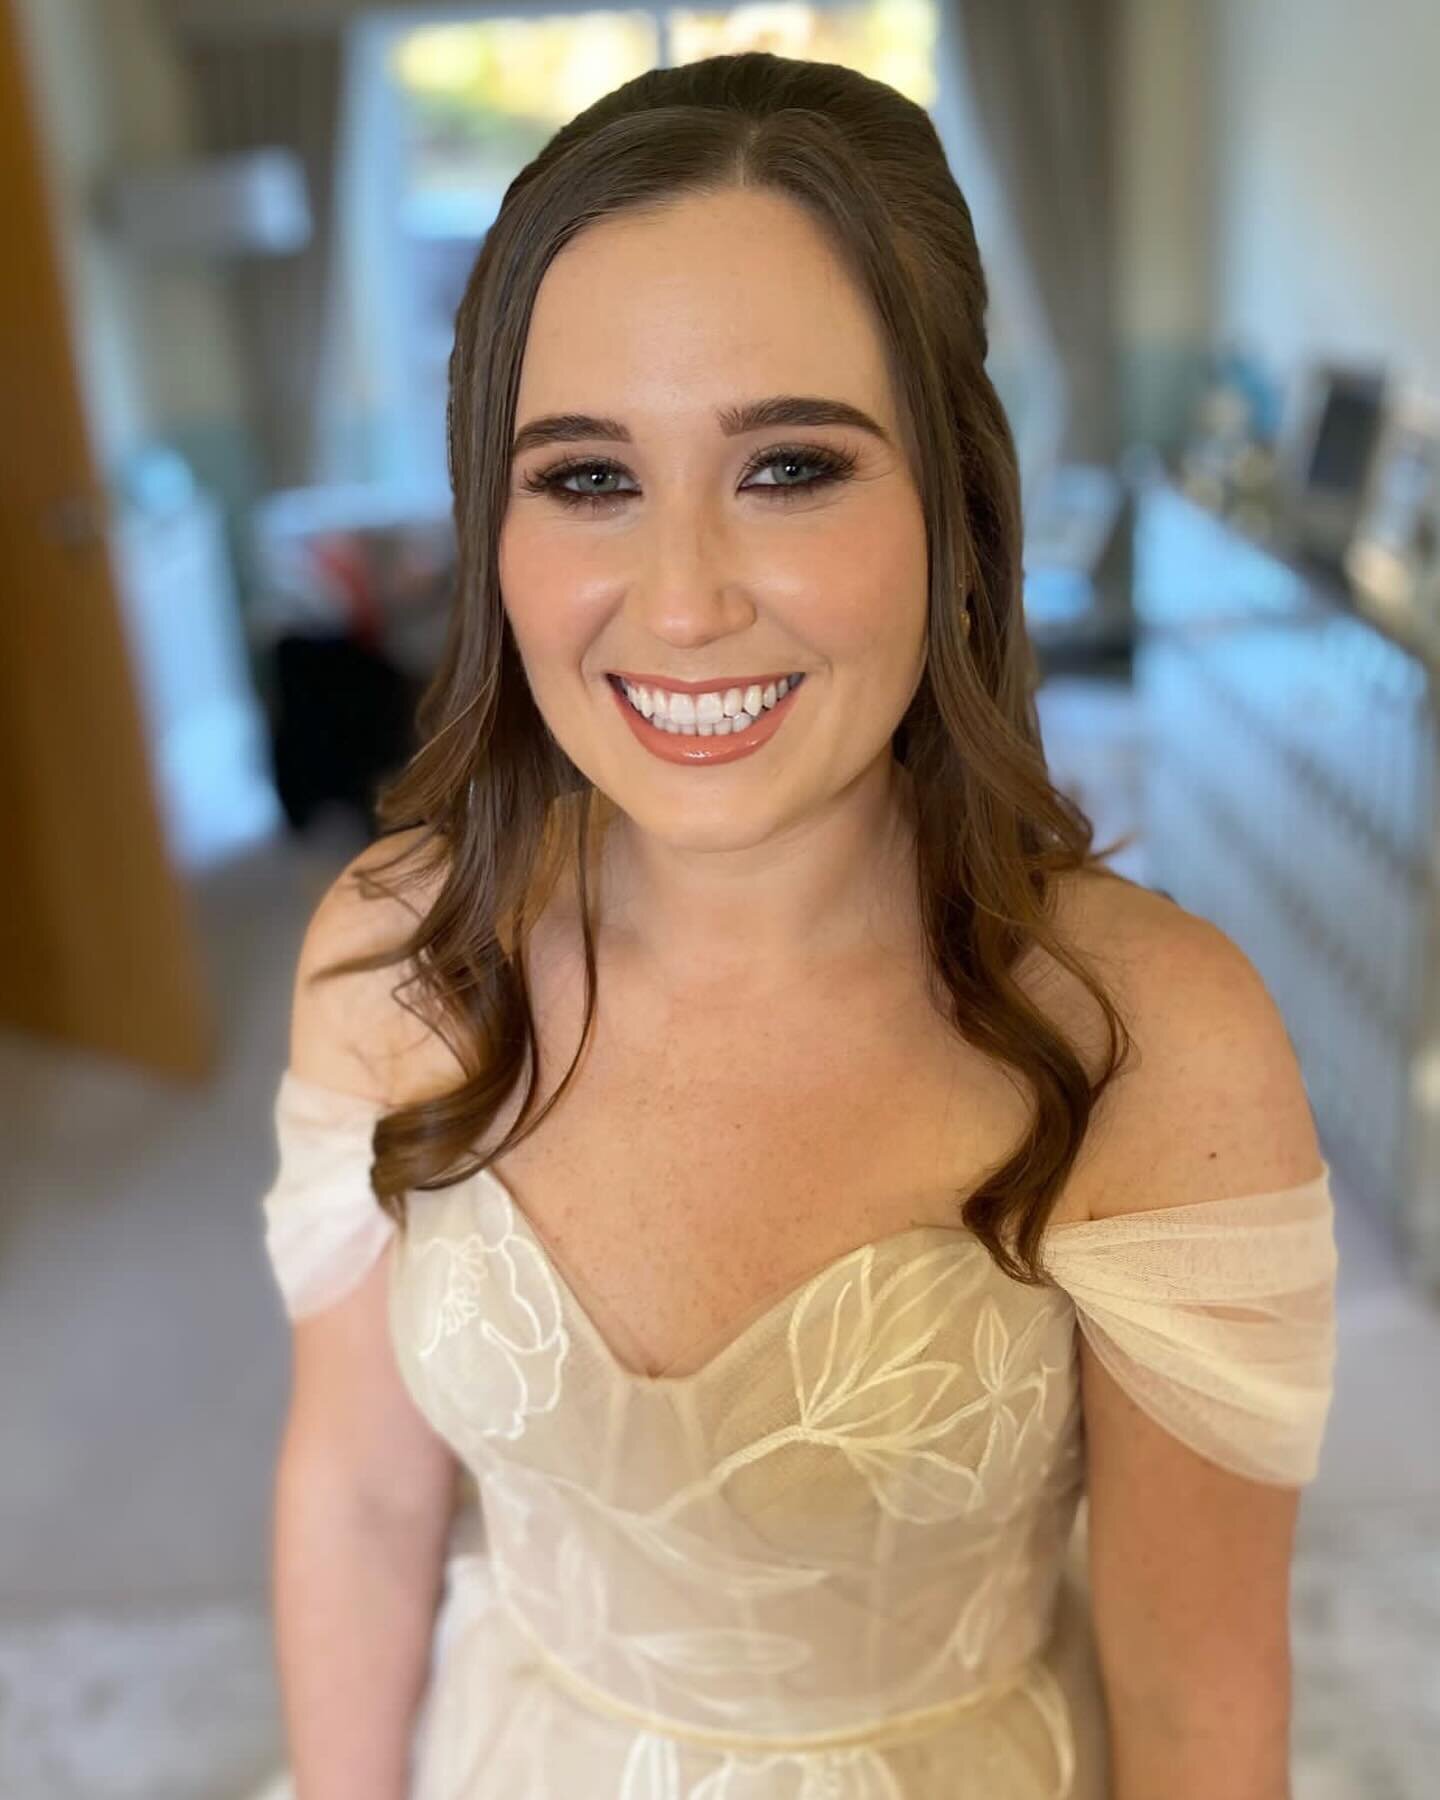 O L I V I A ★

A gorgeous morning, with the nicest and most welcoming family. All the pastries provided for our Elle this morning 😍💖

&bull; MAKEUP - @eseddon_makeup ★ for @bridalbyfrankie 
&bull; HAIR - @lavishhairbyzoe 
&bull;
&bull;
&bull;
 #bri